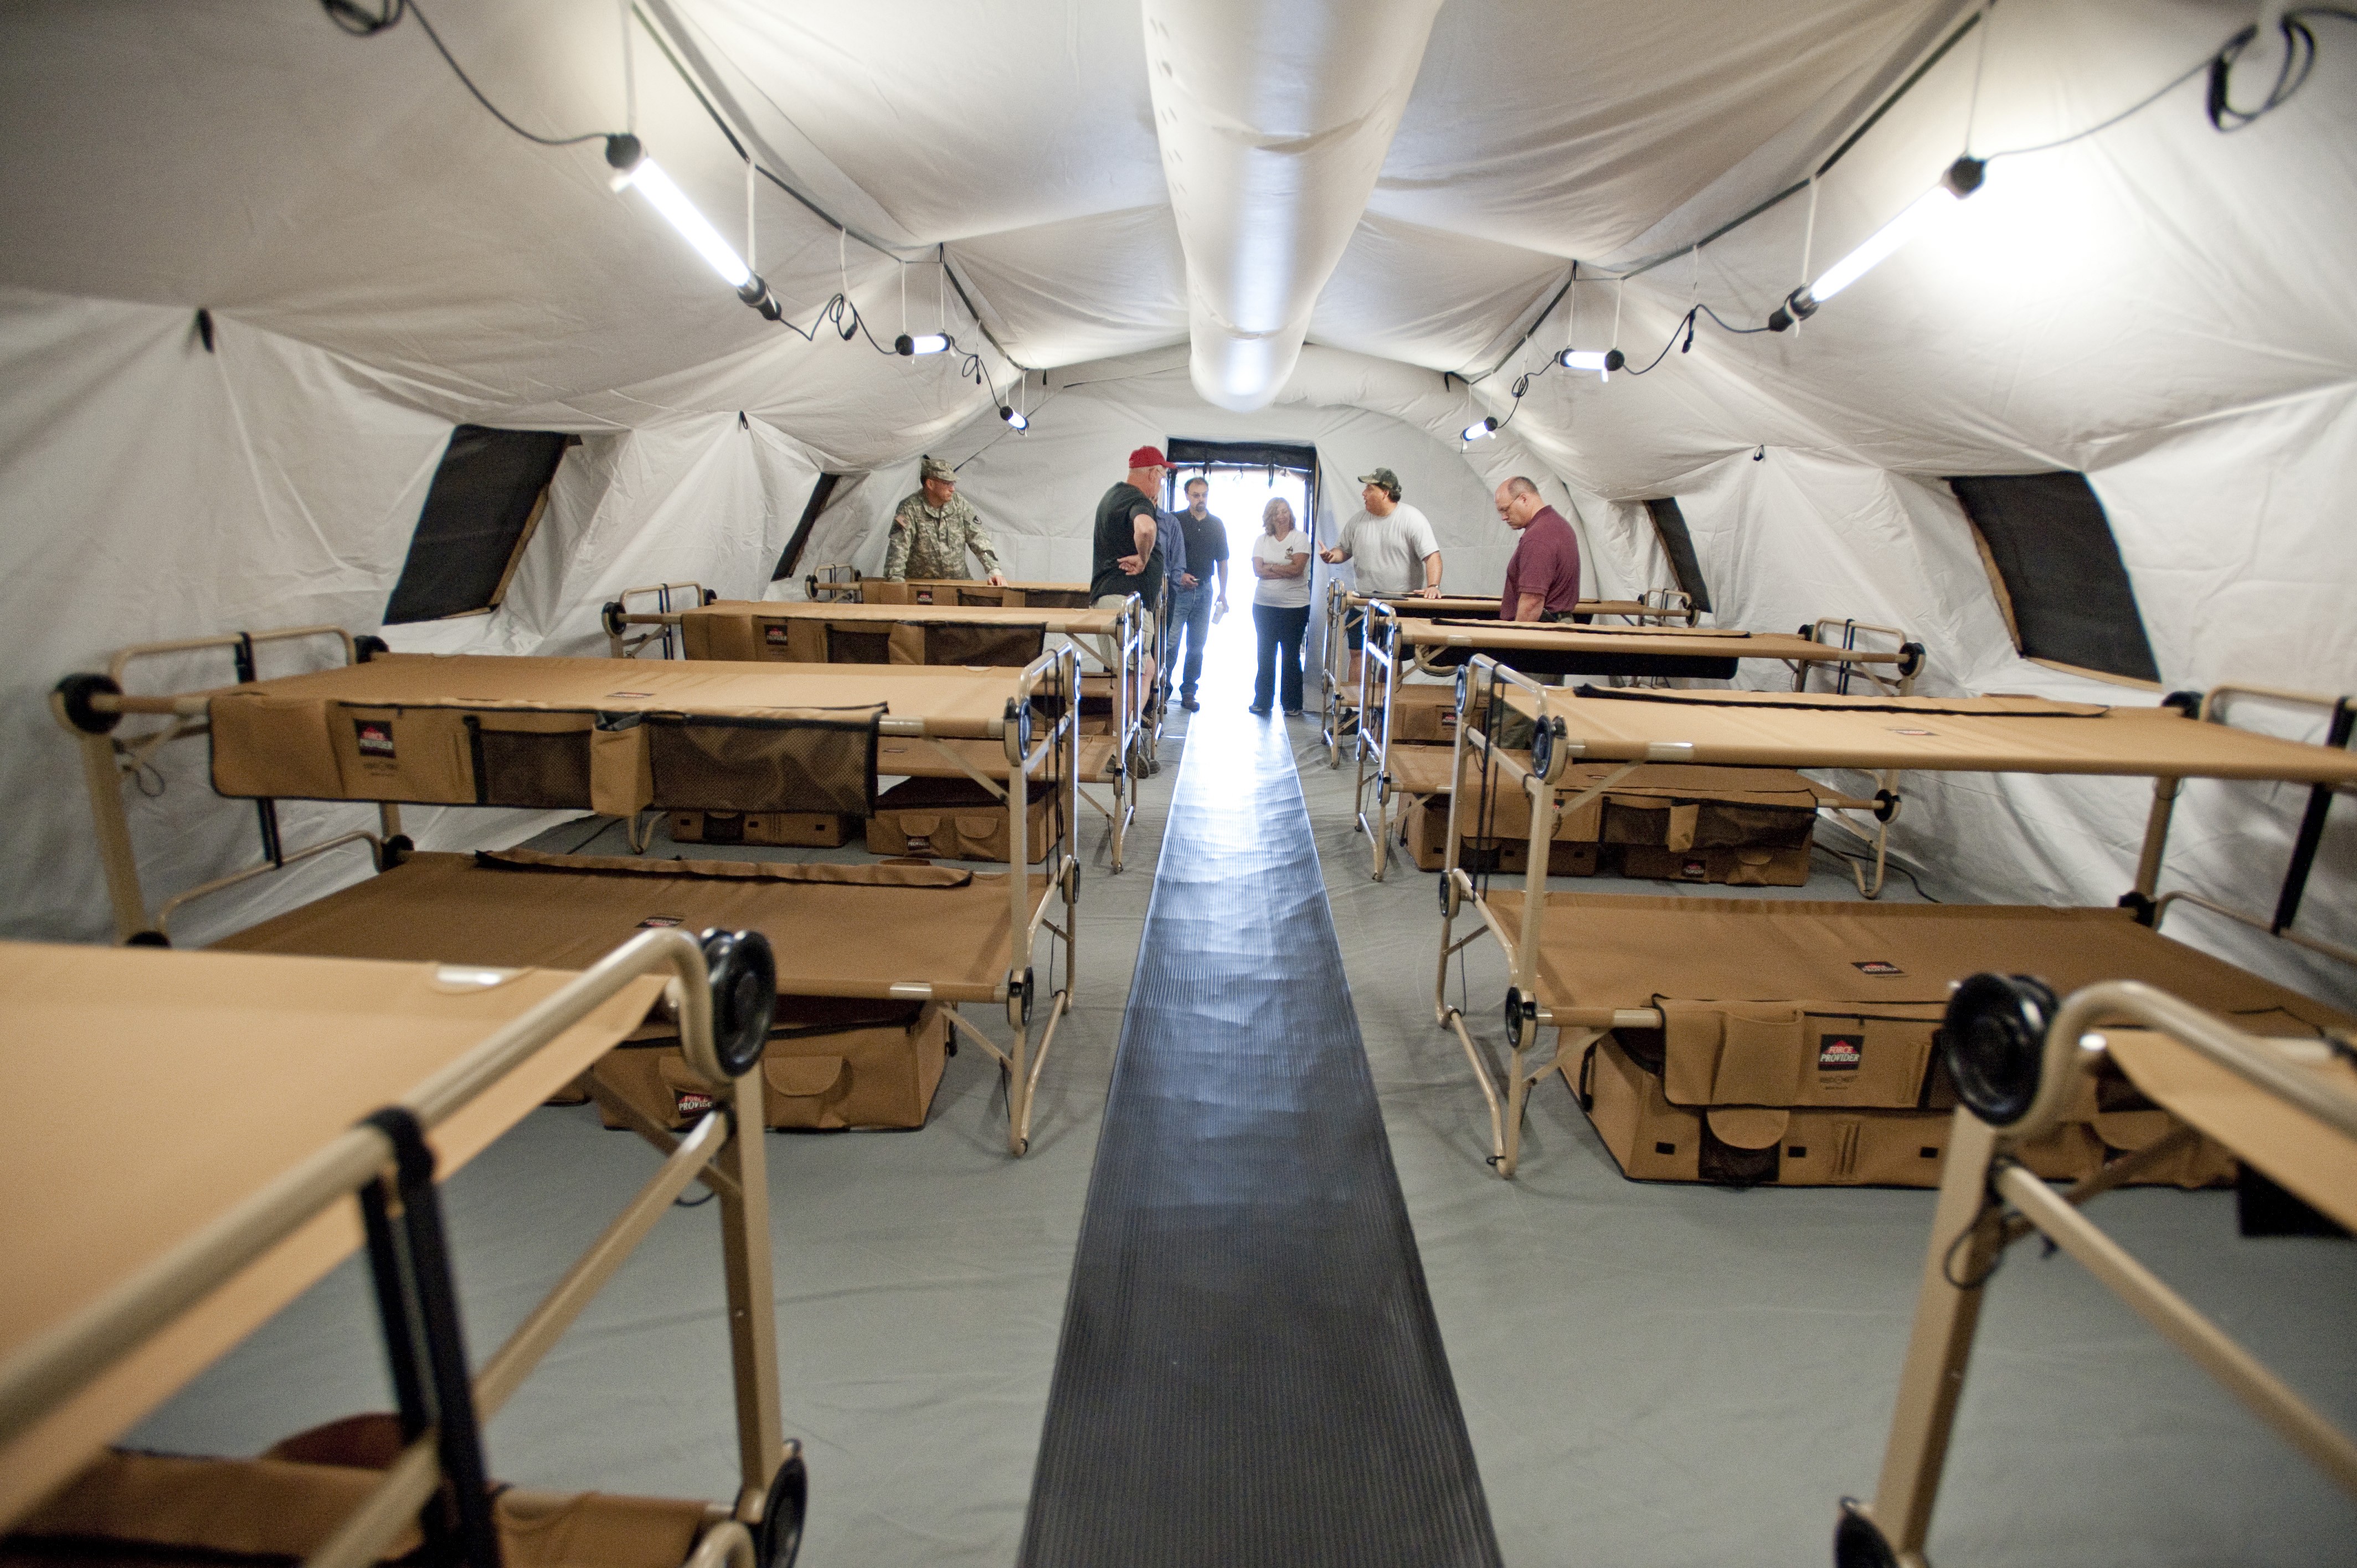 Providing shelter for Soldiers | Article | The United States Army